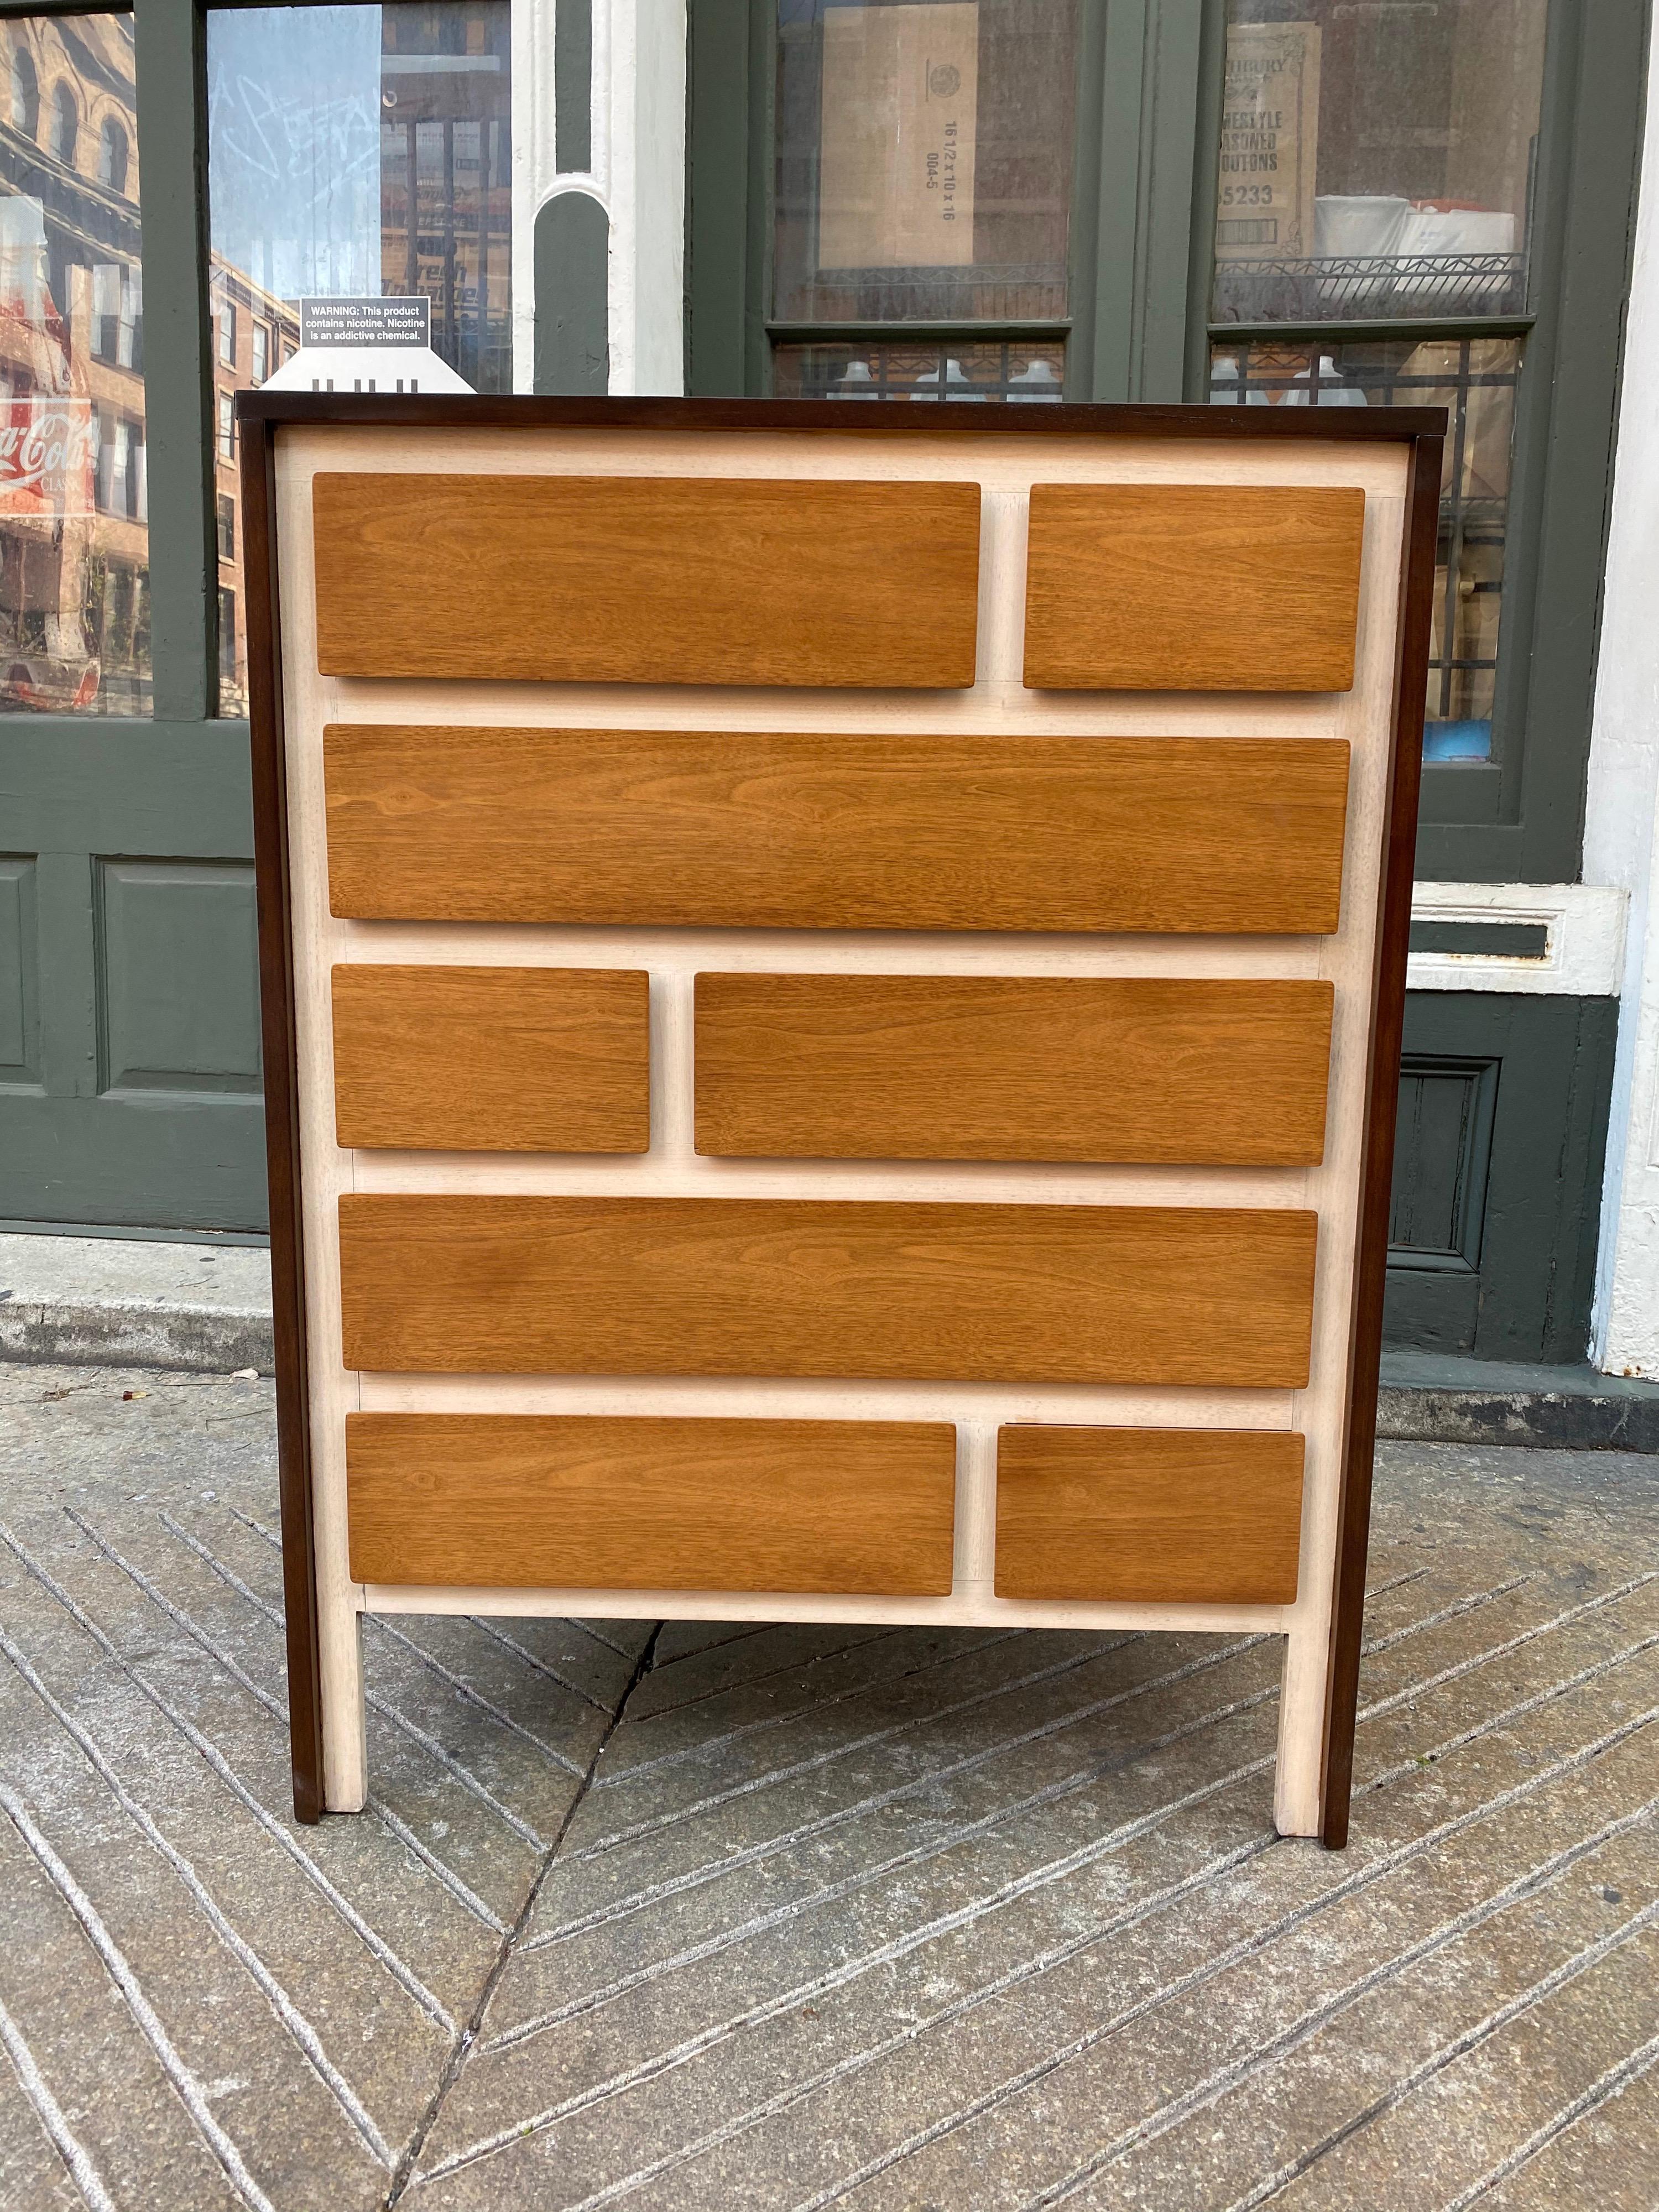 Henredon High Boy dresser in the style of Gio Ponti. Ponti designed a bedroom set for the Singer Furniture Company in 1958. This Set is inspired by that design probably from the early 1960's. Outer cabinet is dark walnut, light walnut drawer fronts